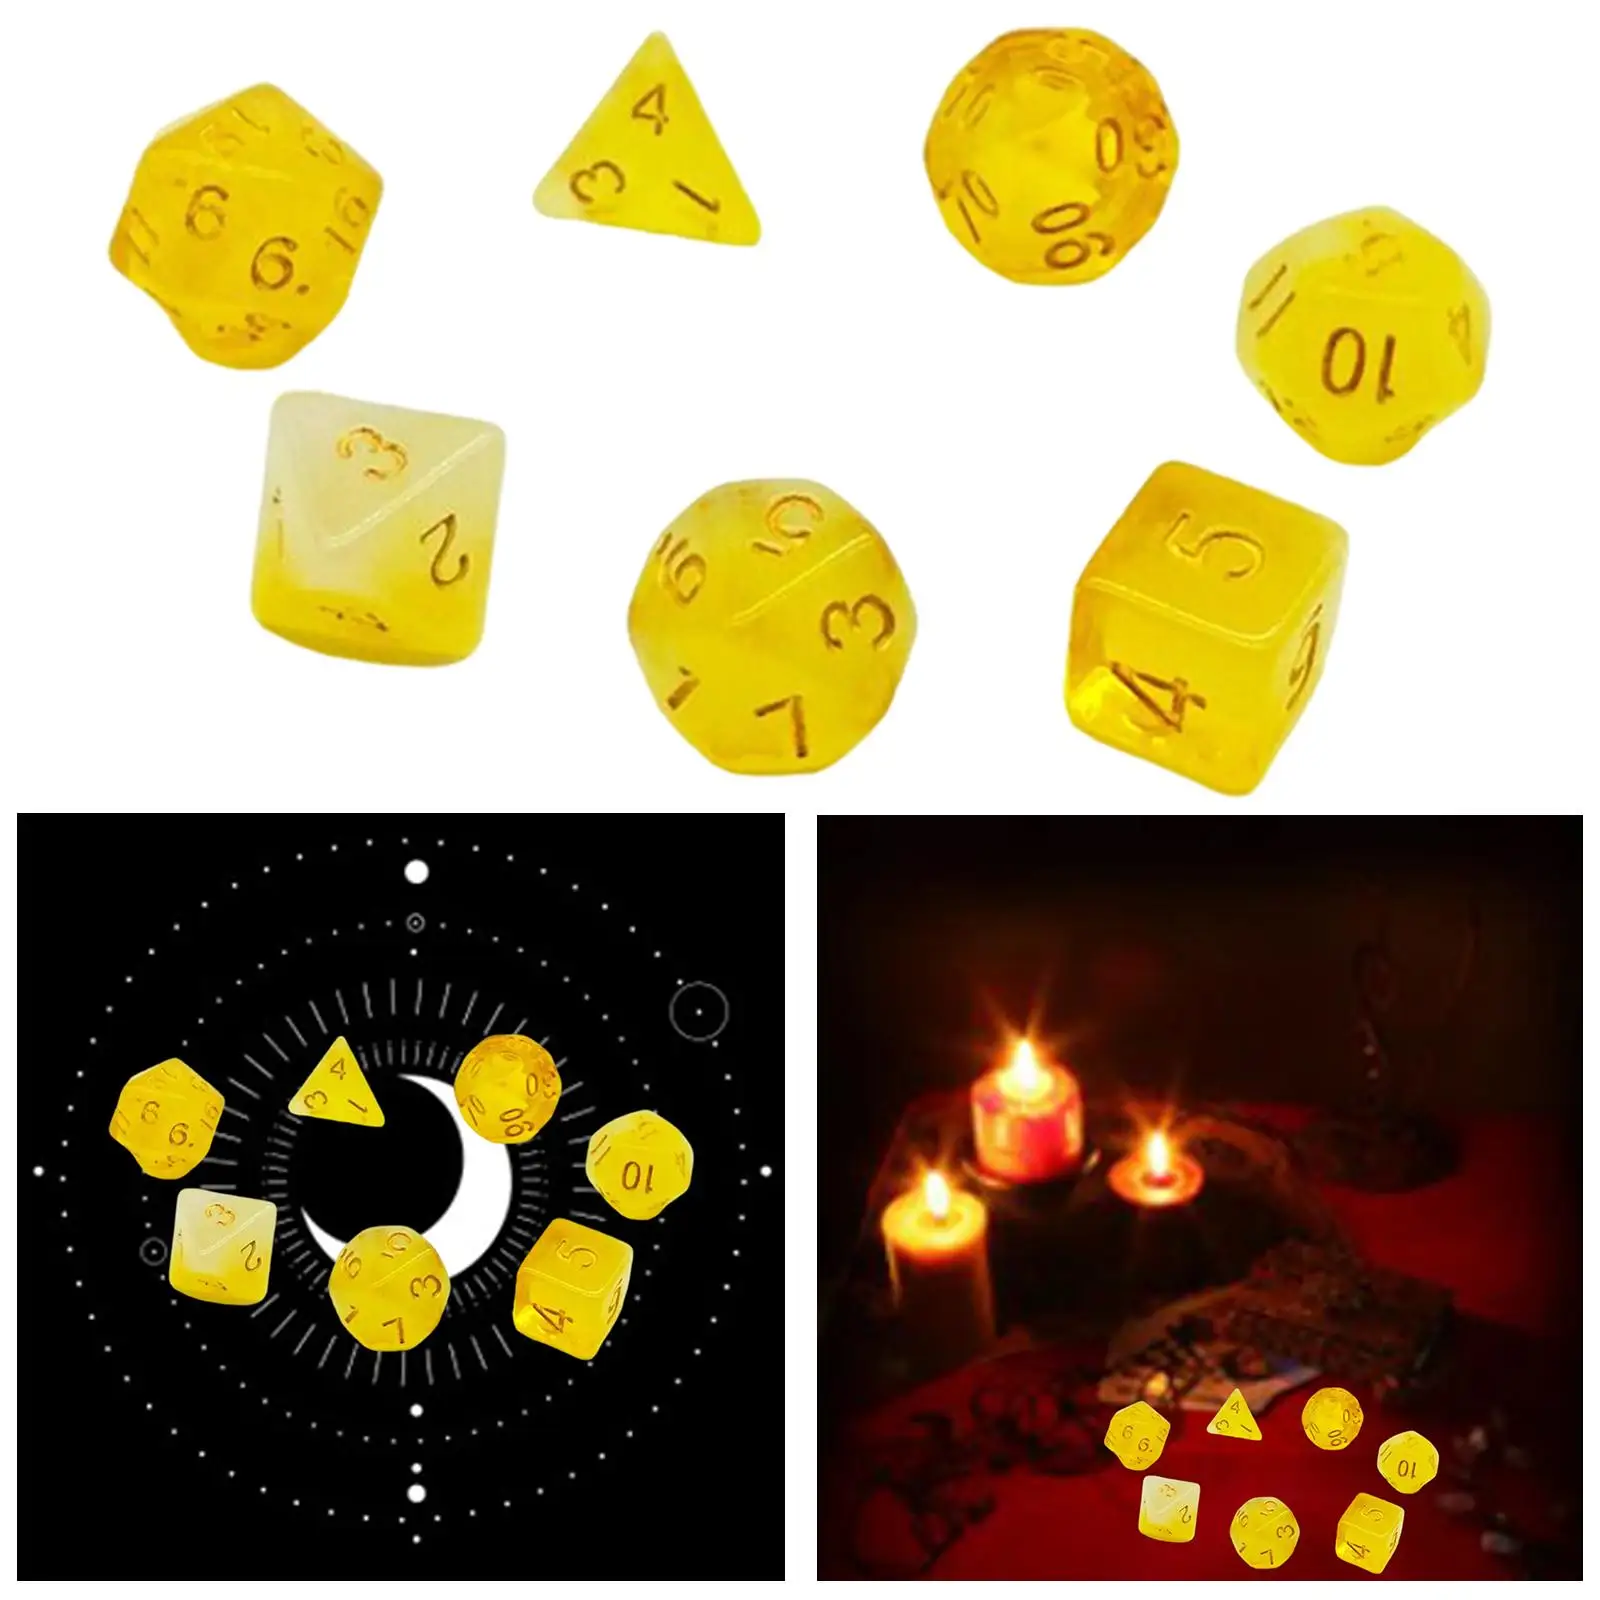 7x Acrylic Polyhedral Dice TRPG DND Games for Leisure Entertainment Dice Set